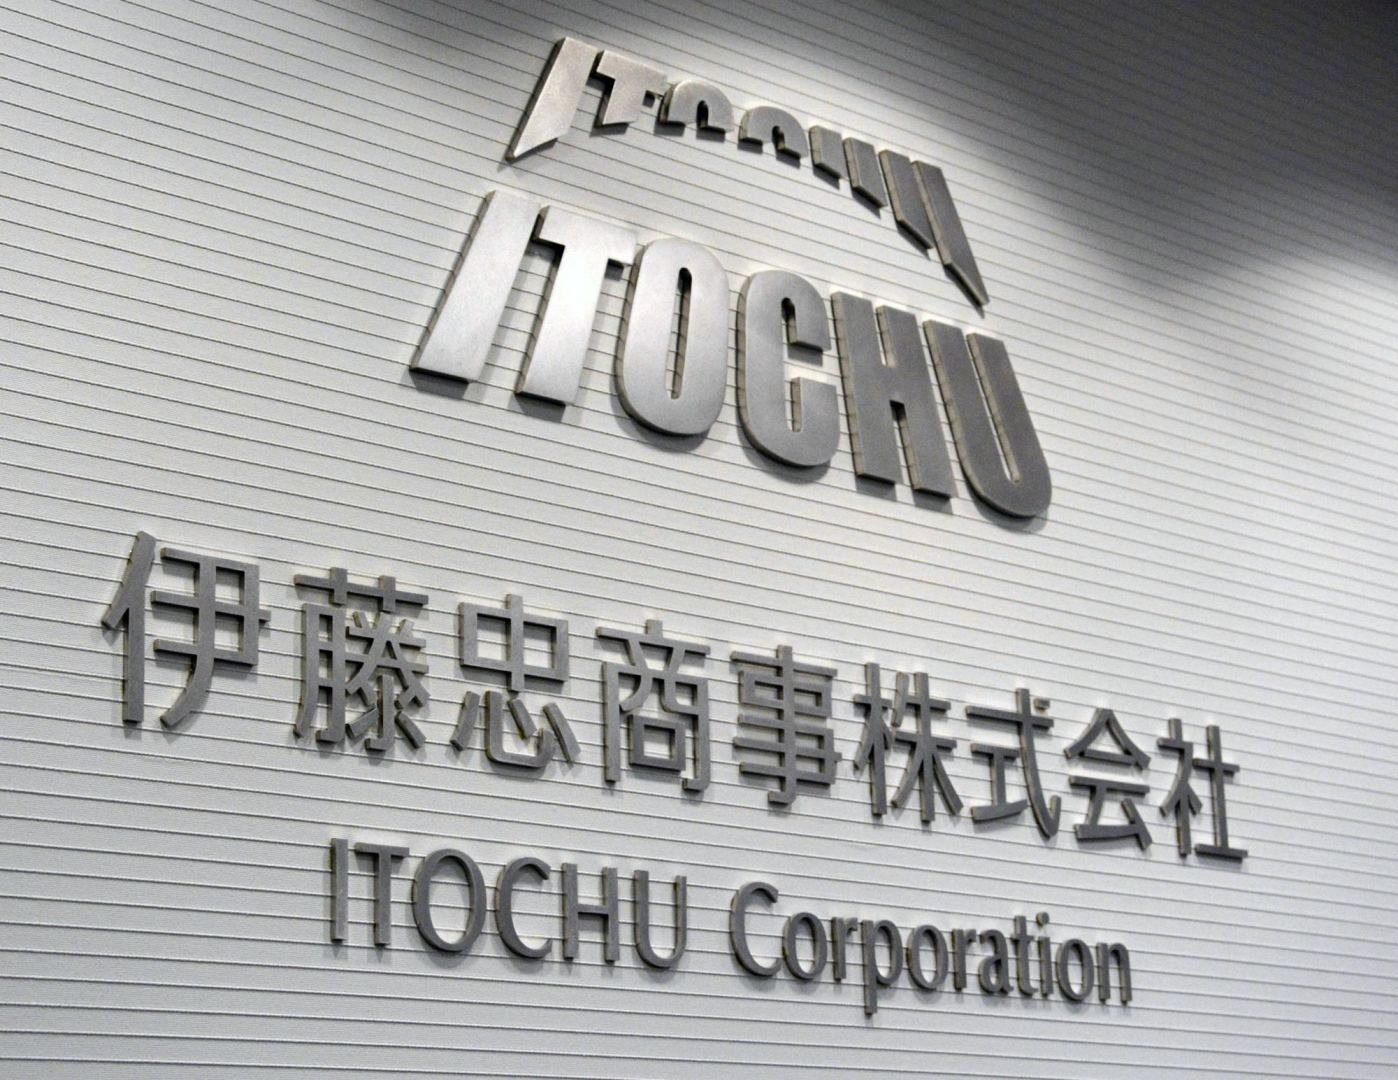 ITOCHU launches new platform to address construction challenges